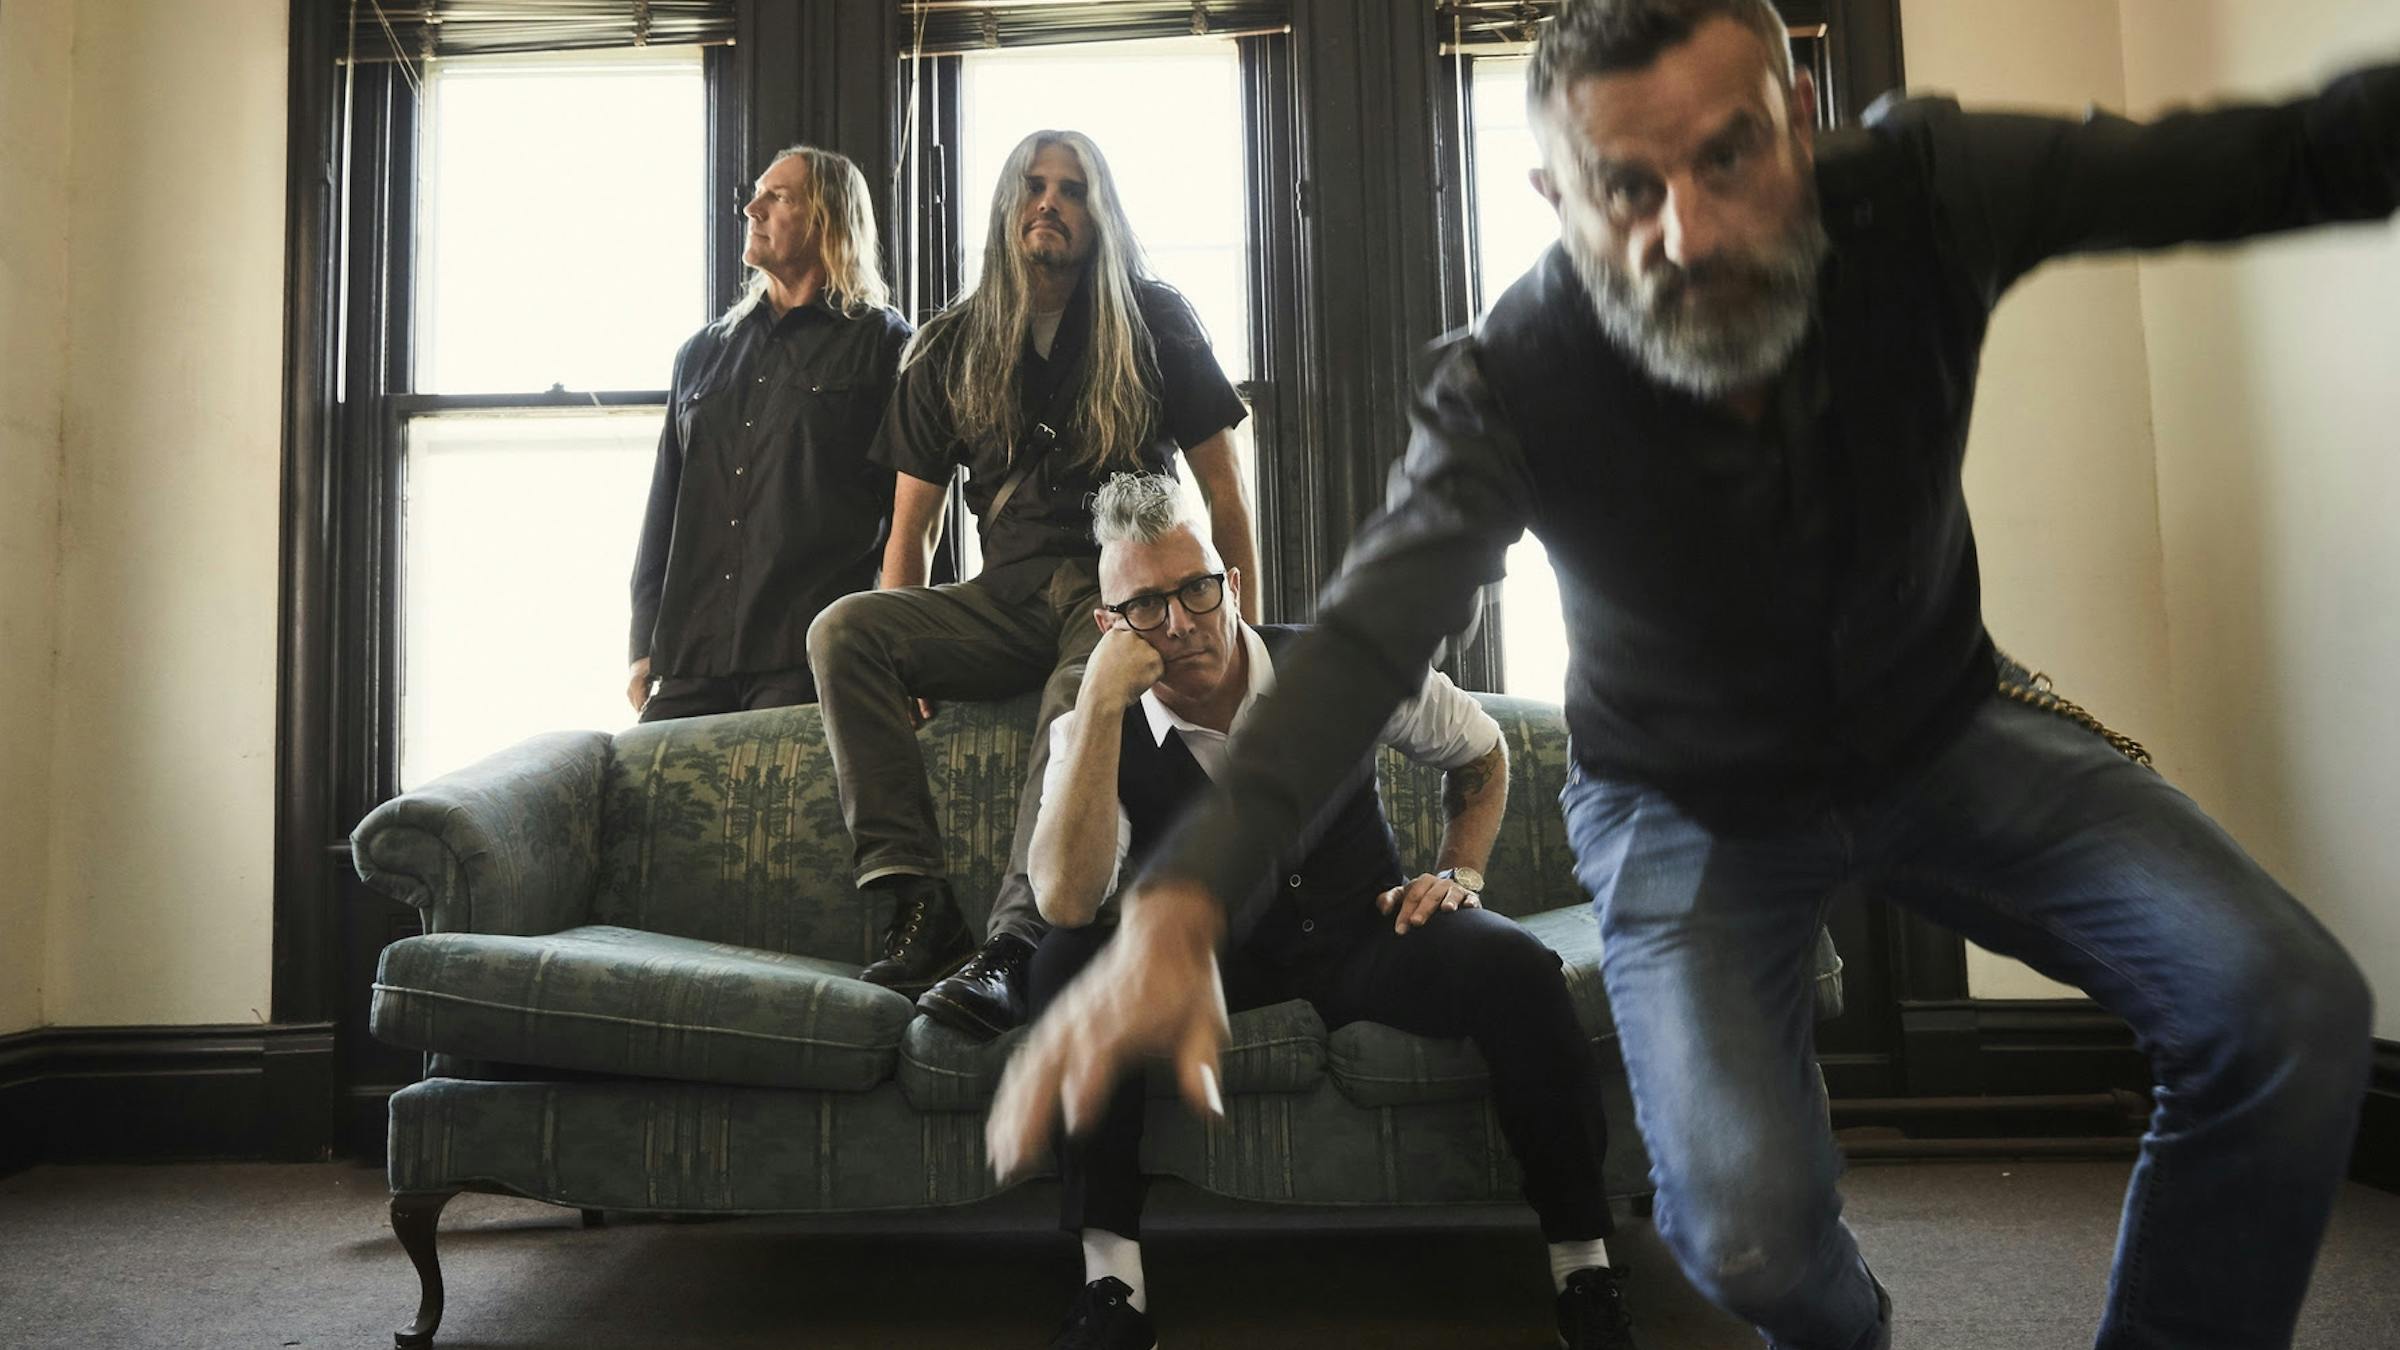 Tool Reveal Additional U.S. Tour Dates For March